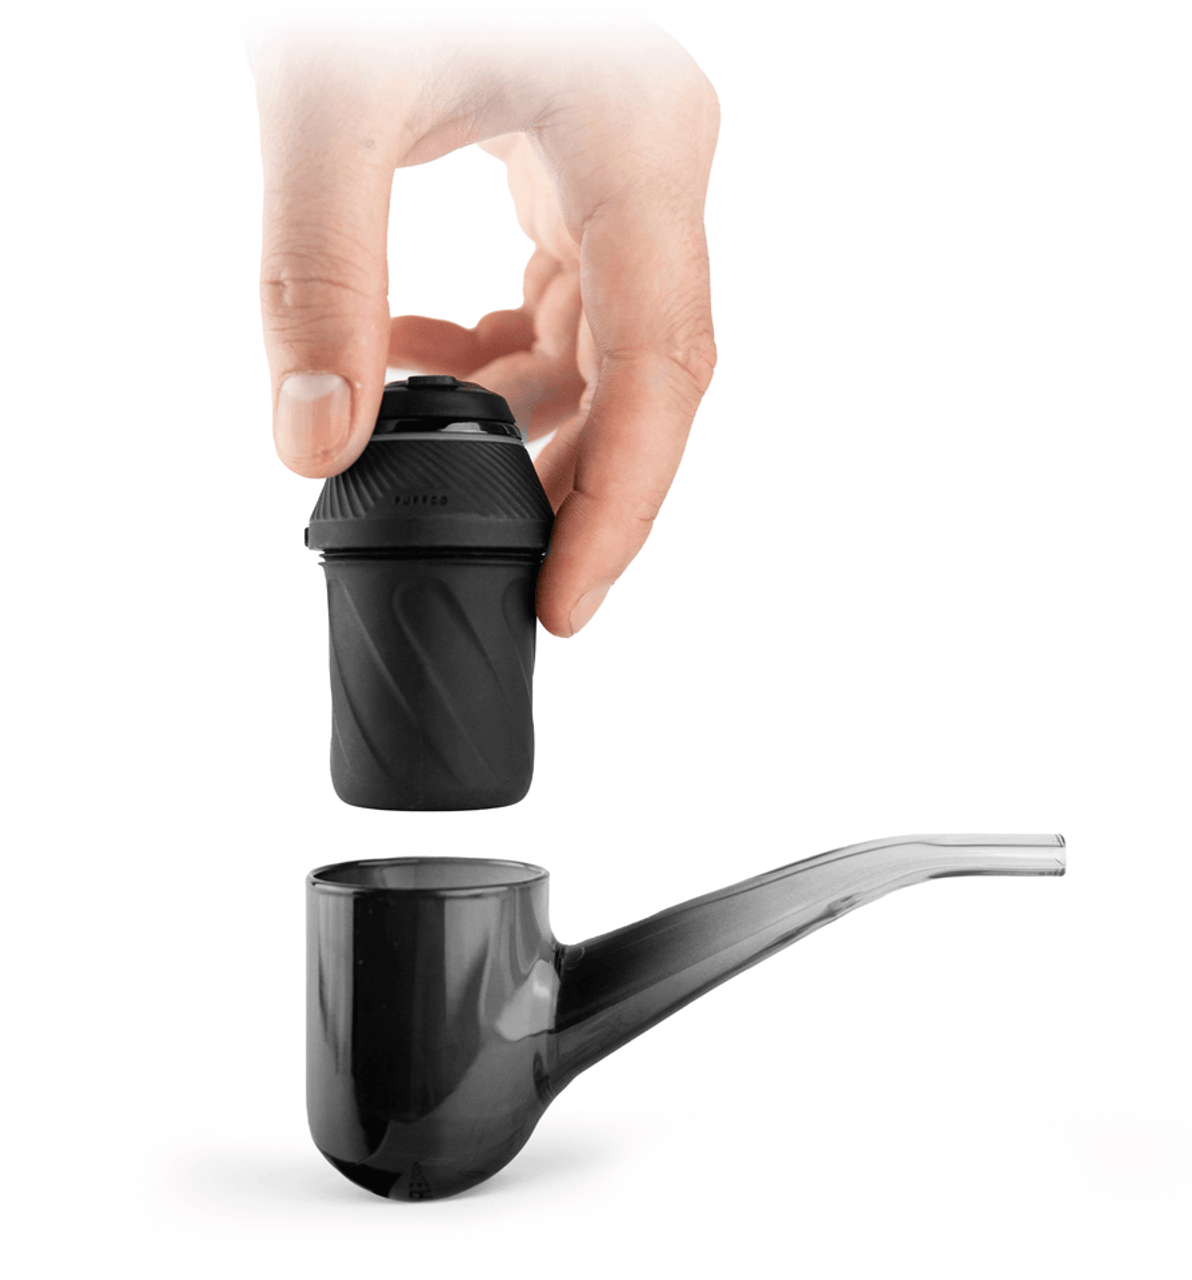 Puffco Proxy Vaporizer in black, portable ceramic and glass design with battery power, front view